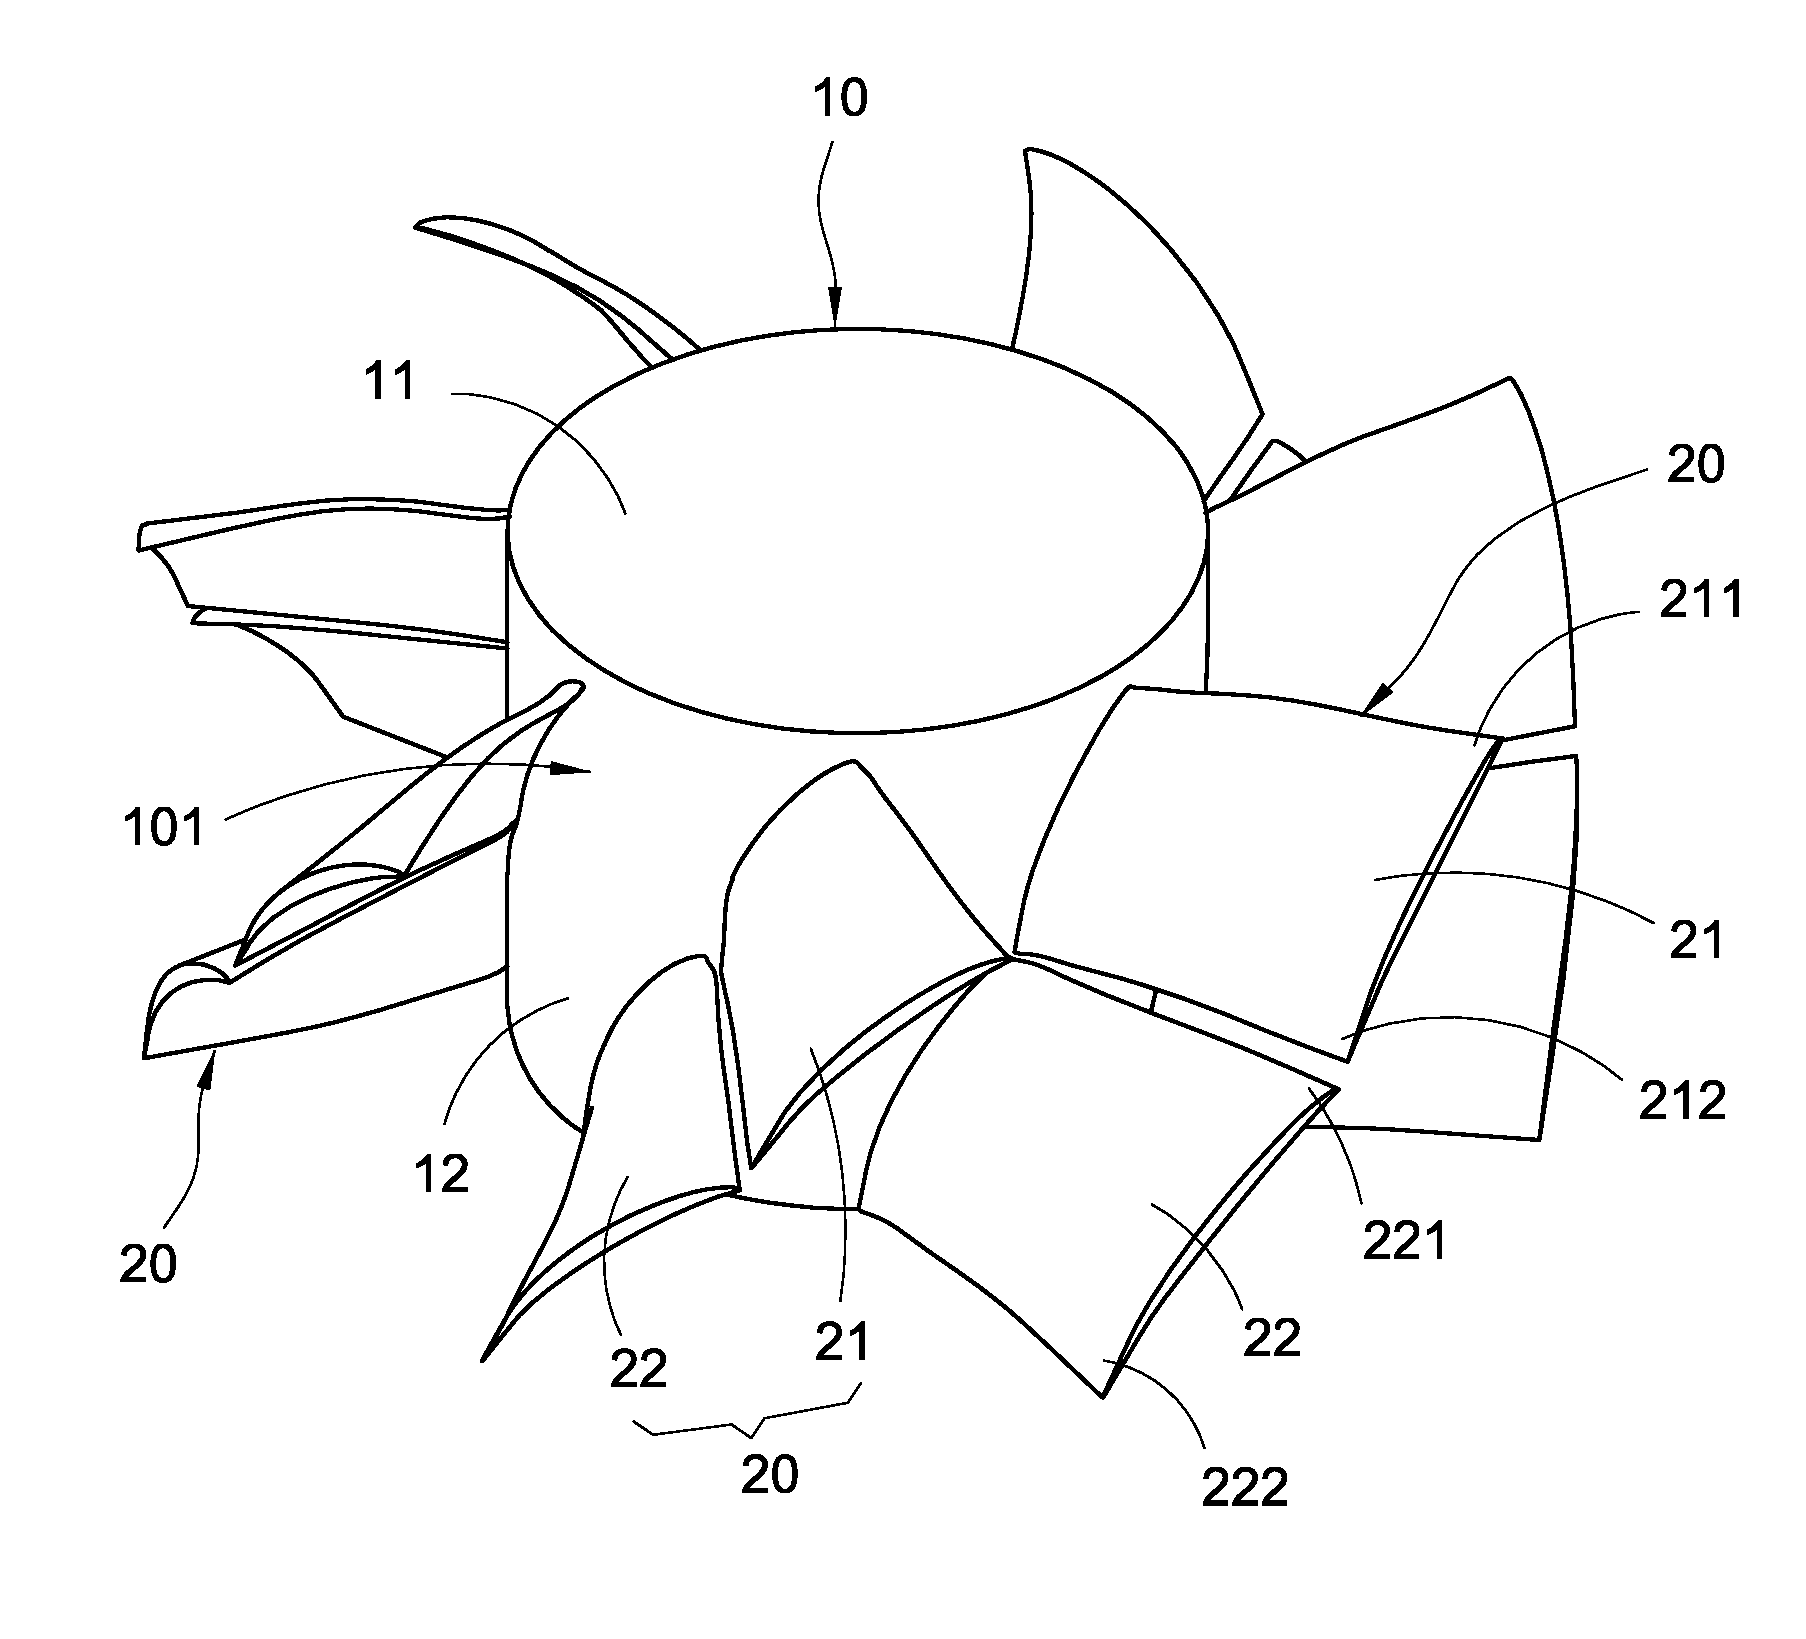 Blade structure of axial fan